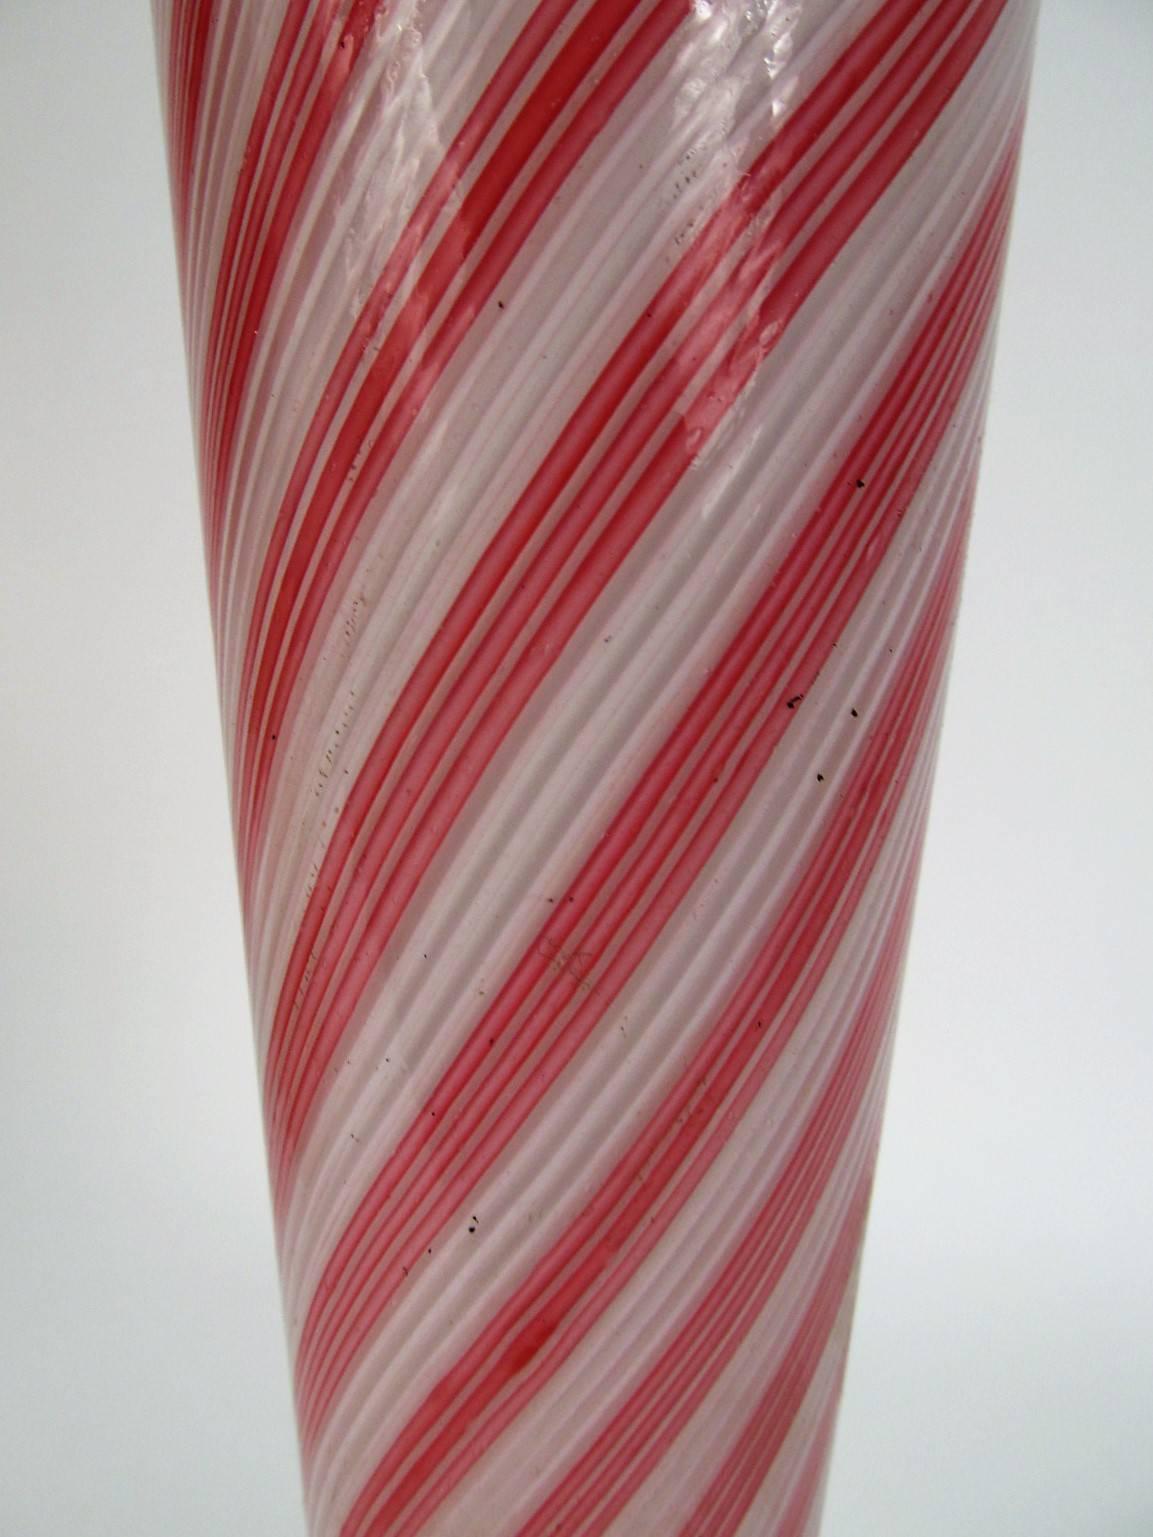 Fine Murano Swirled Candy Cane Table Lamp In Excellent Condition For Sale In Papaikou, HI